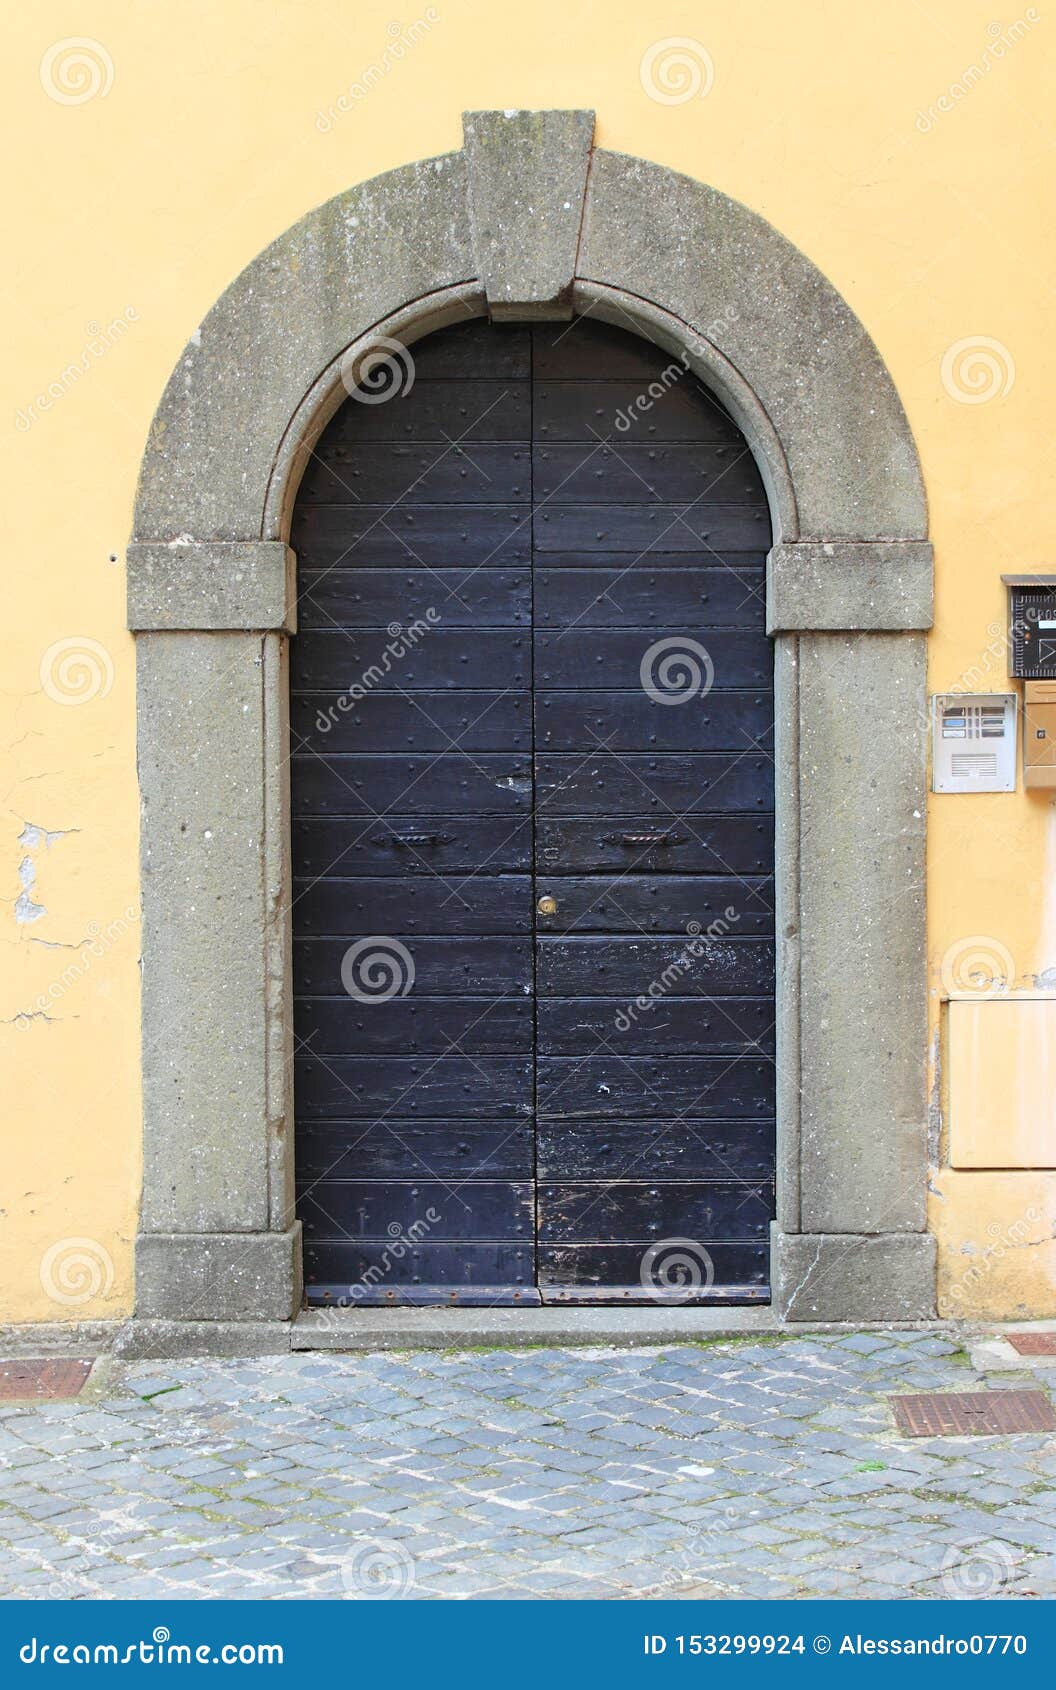 Medieval front door stock photo. Image of history, fretted - 153299924